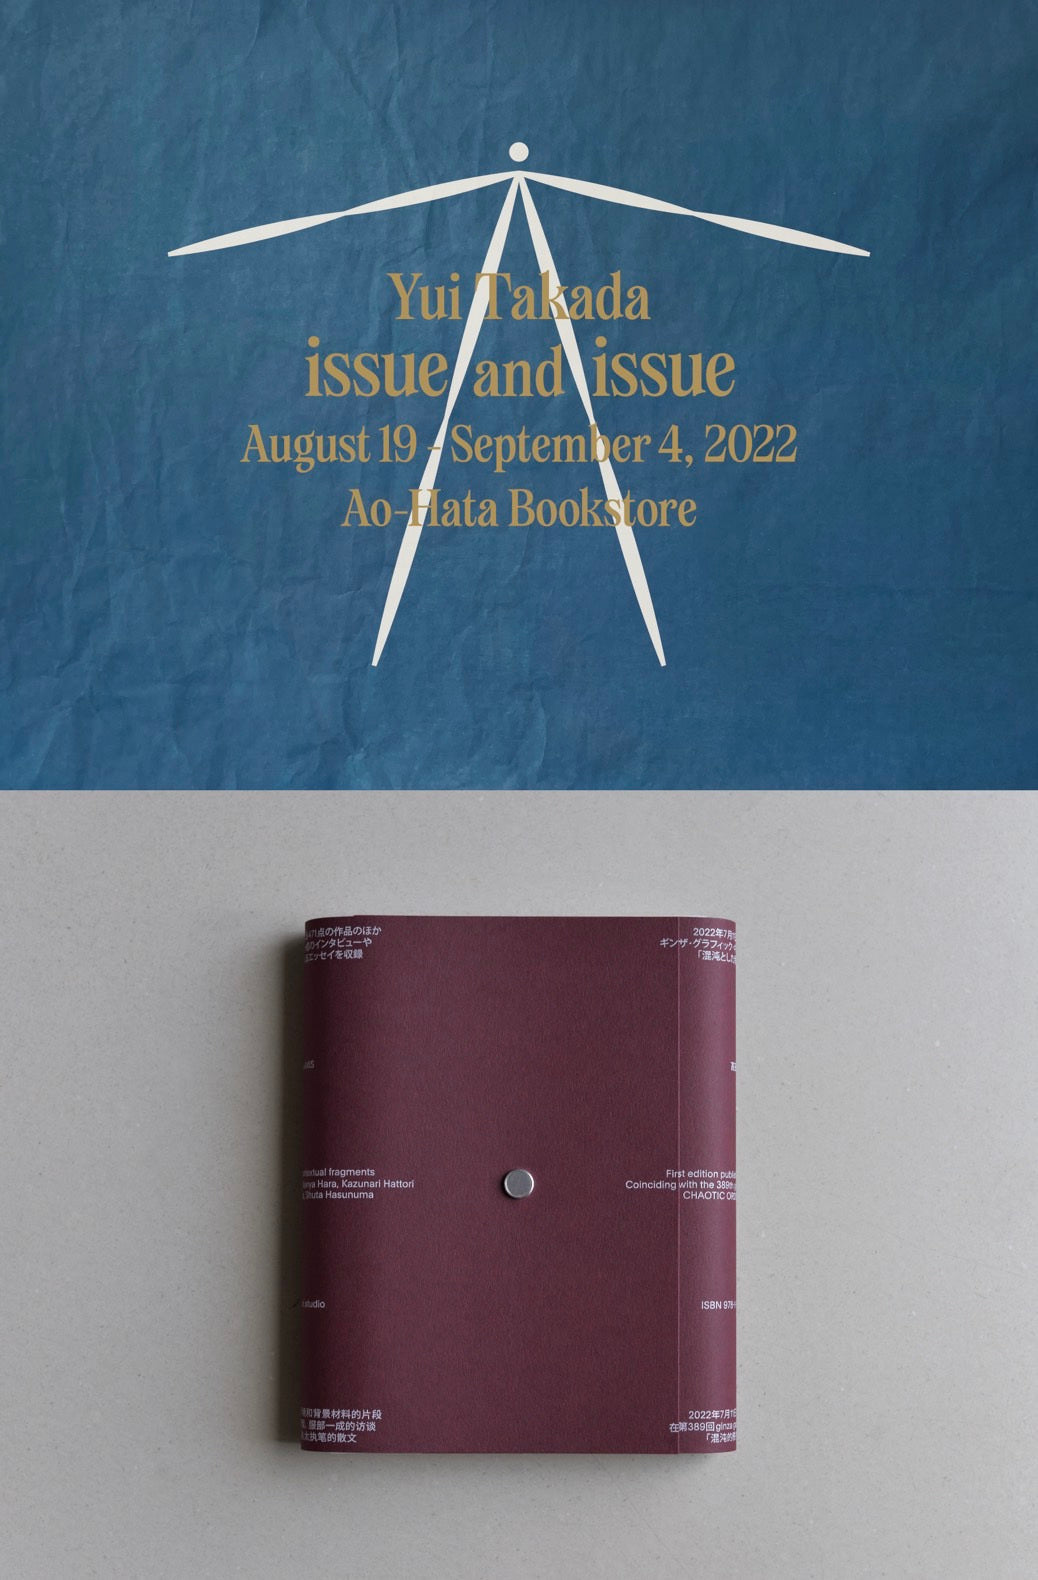 issue and issue | Yui Takada